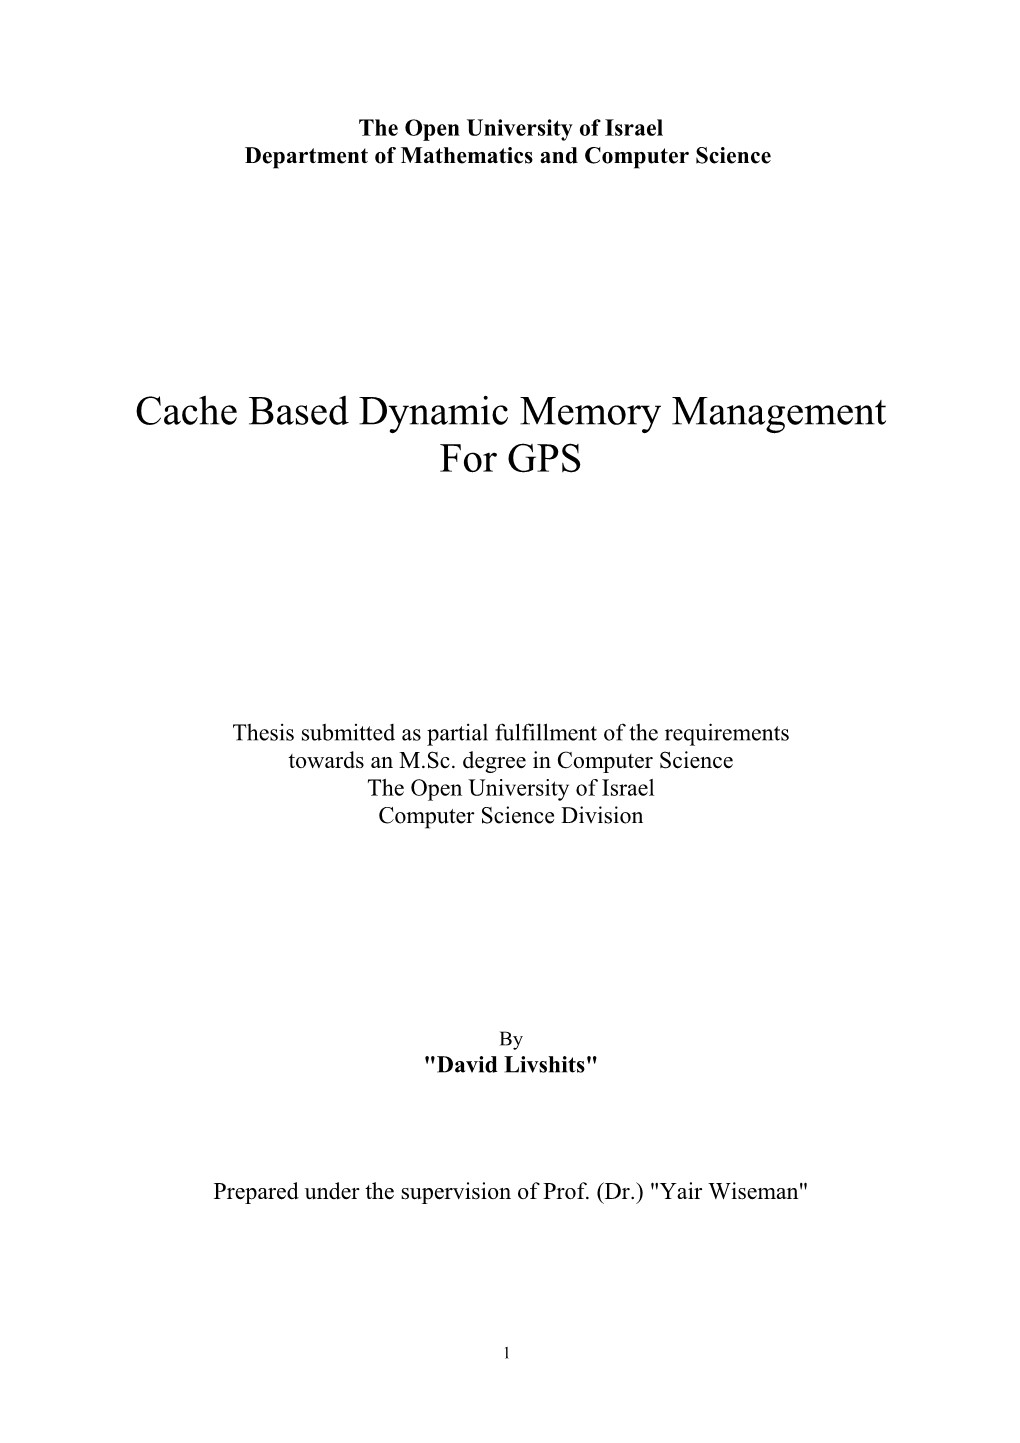 Cache Based Dynamic Memory Managements for GPS